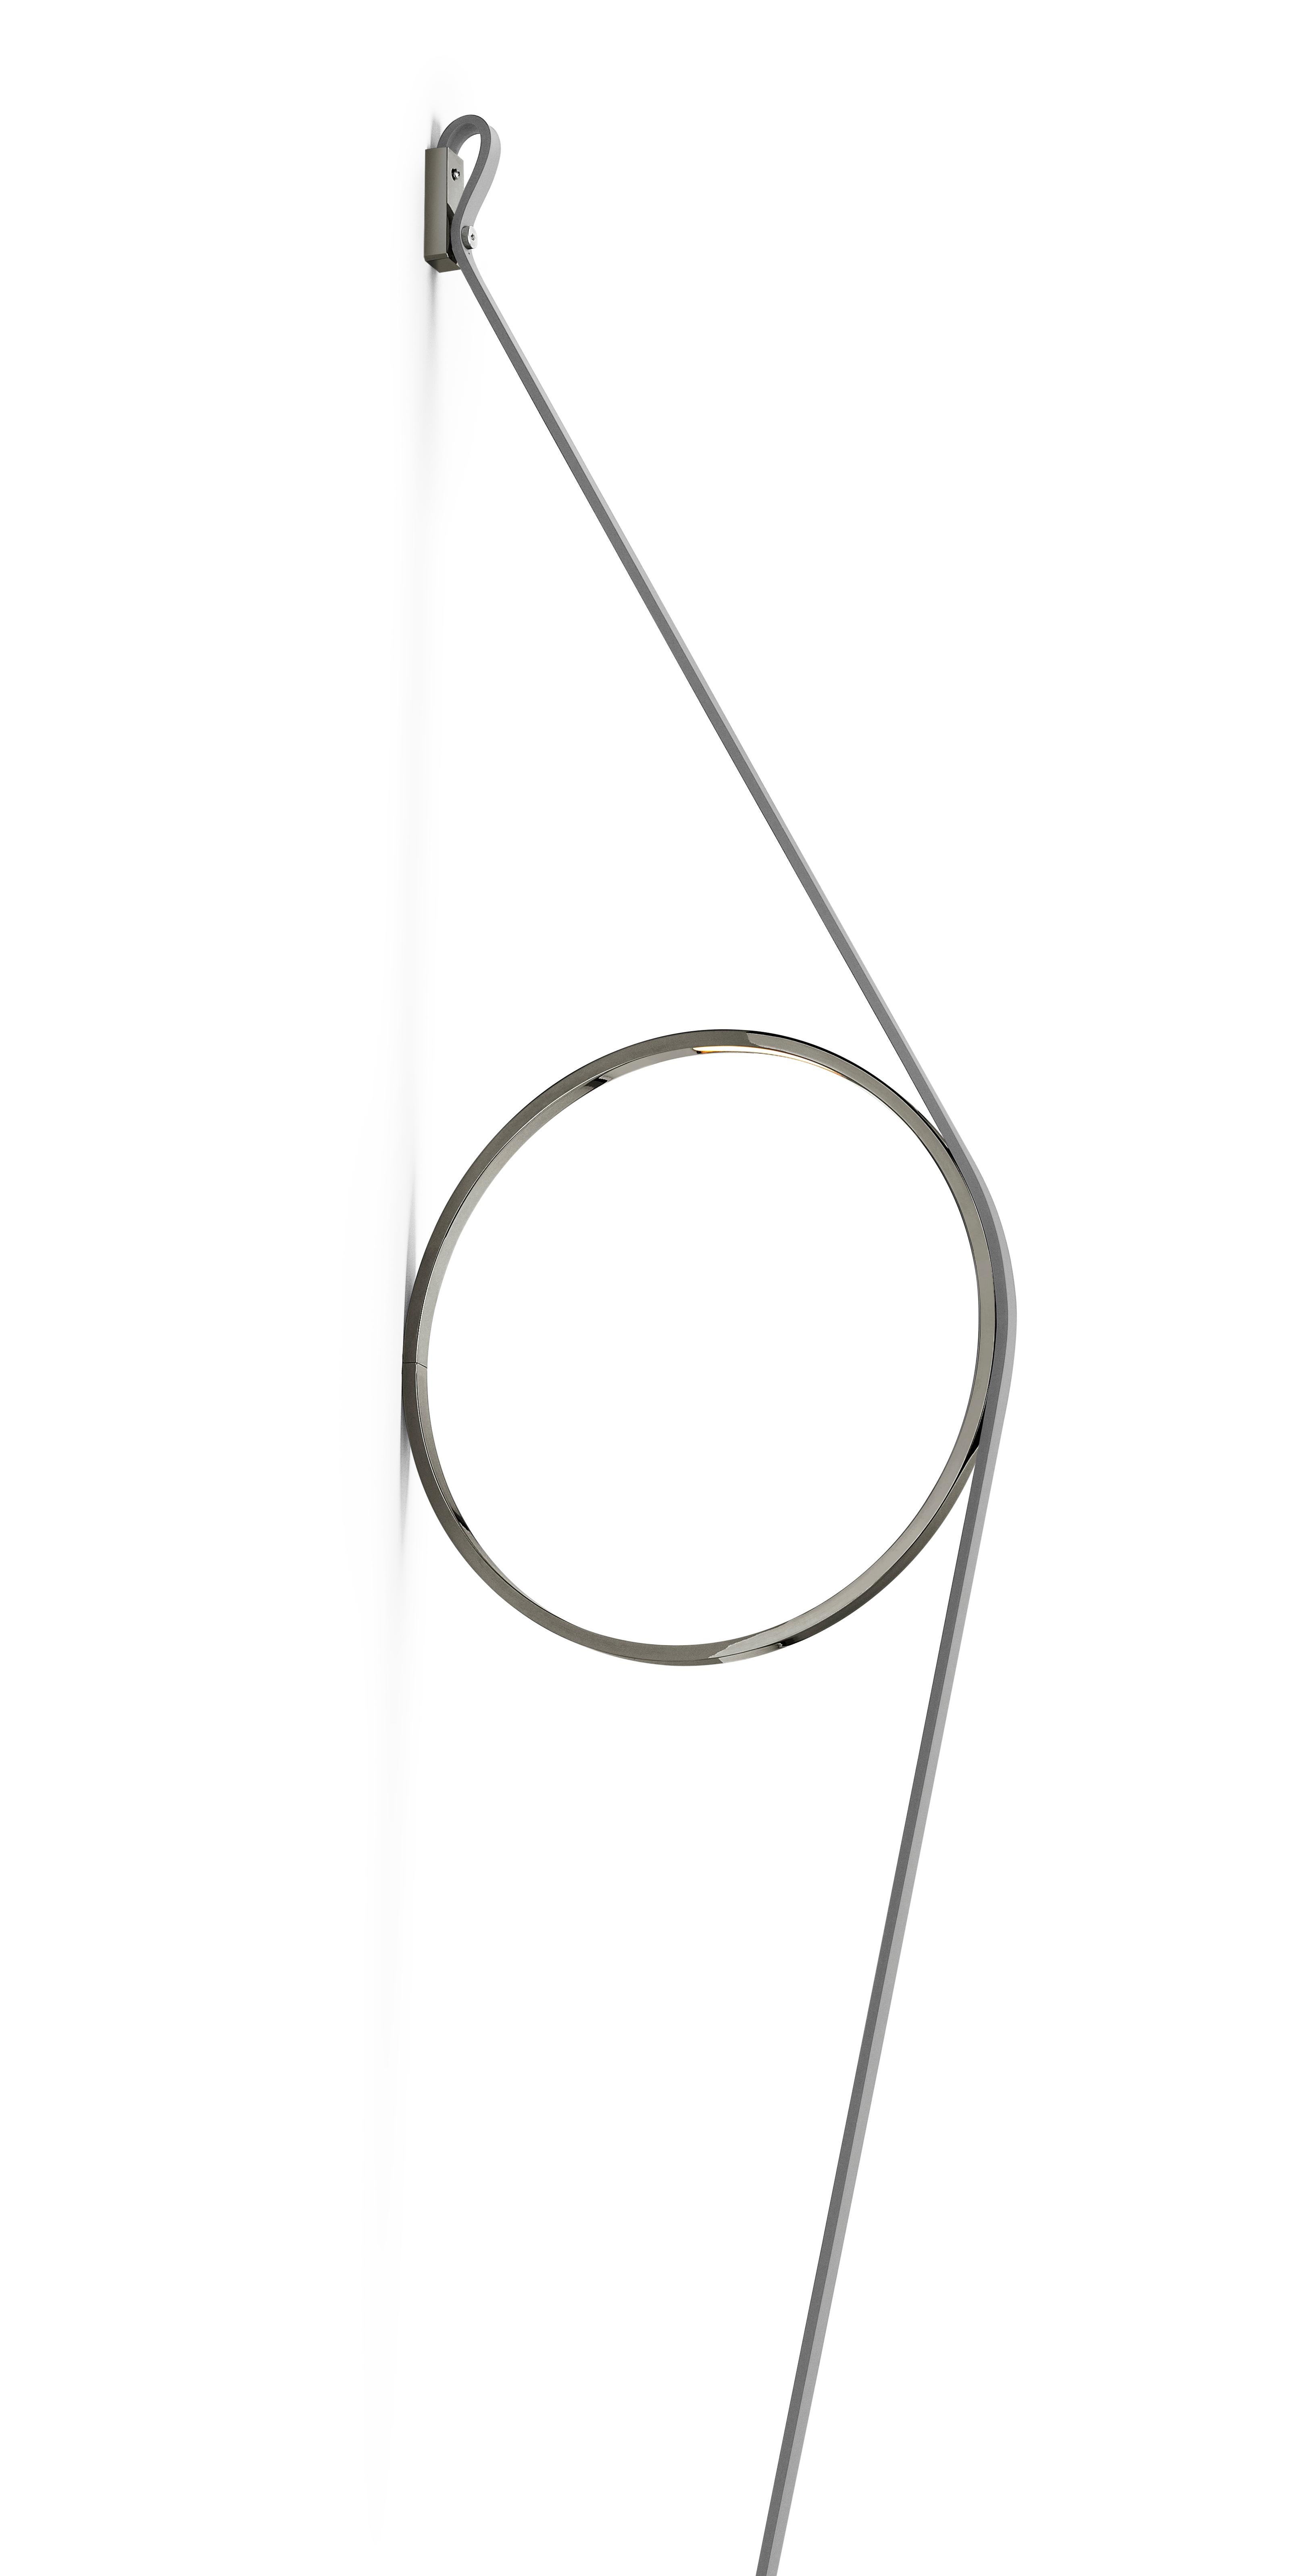 An exercise in reduction, stripped back to its most essential elements, offering beautifully rendered light. The wire holds a simple ring fitted with an LED strip. The cable and ring are available in different color combinations and a range of